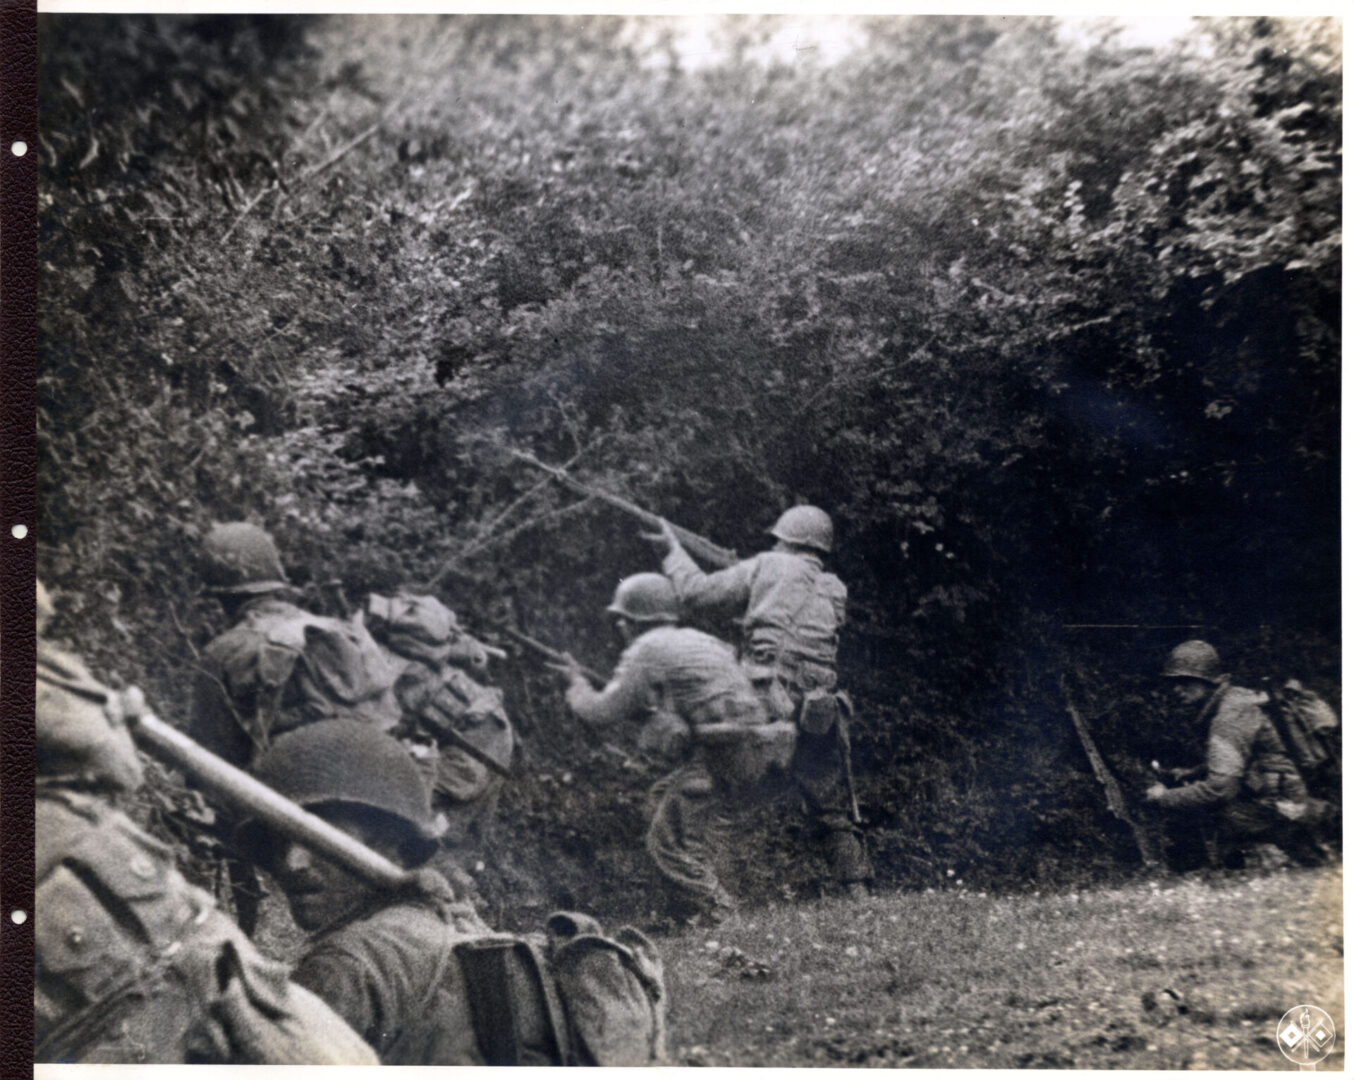 US troops take cover and fire back at a German sniper